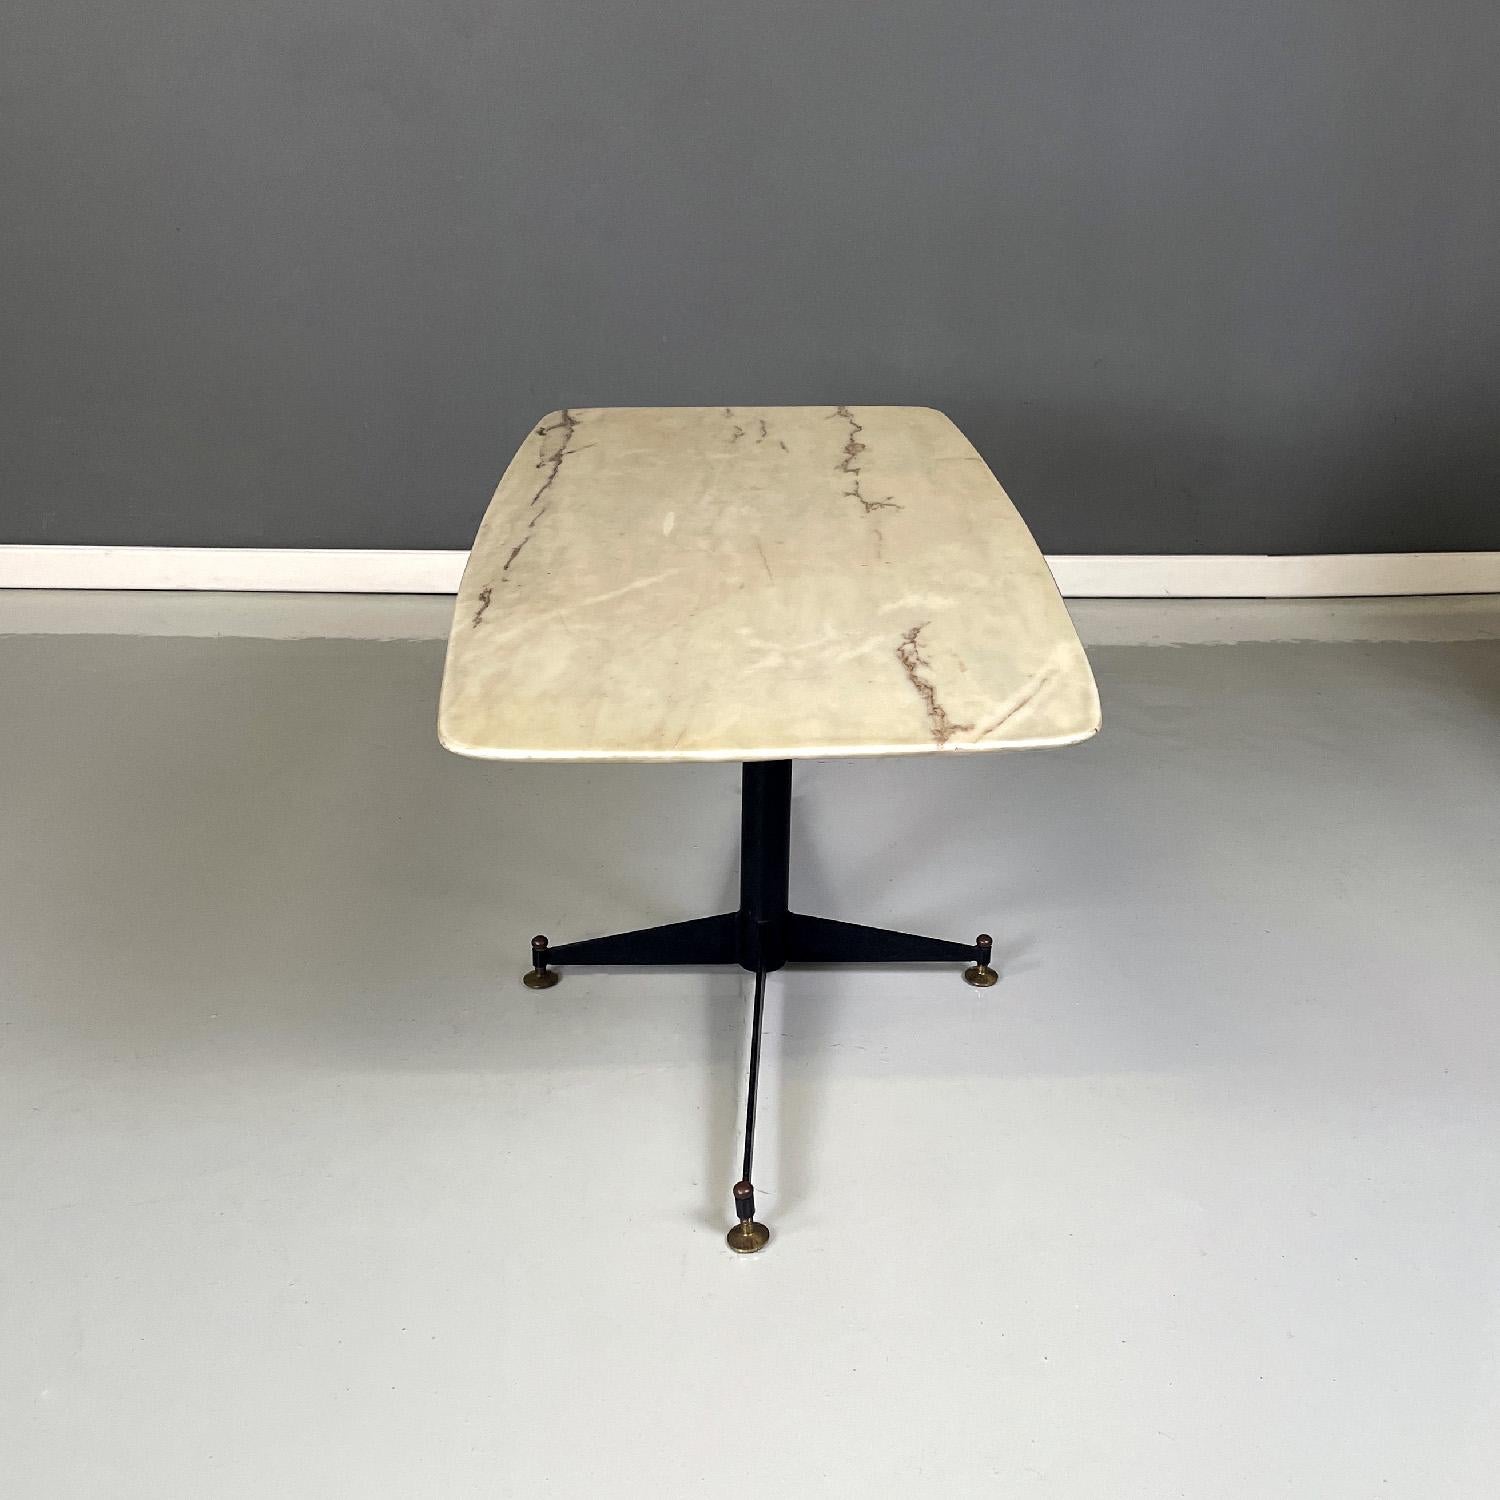 Italian mid-century modern coffee table with marble top, 1950s For Sale 1